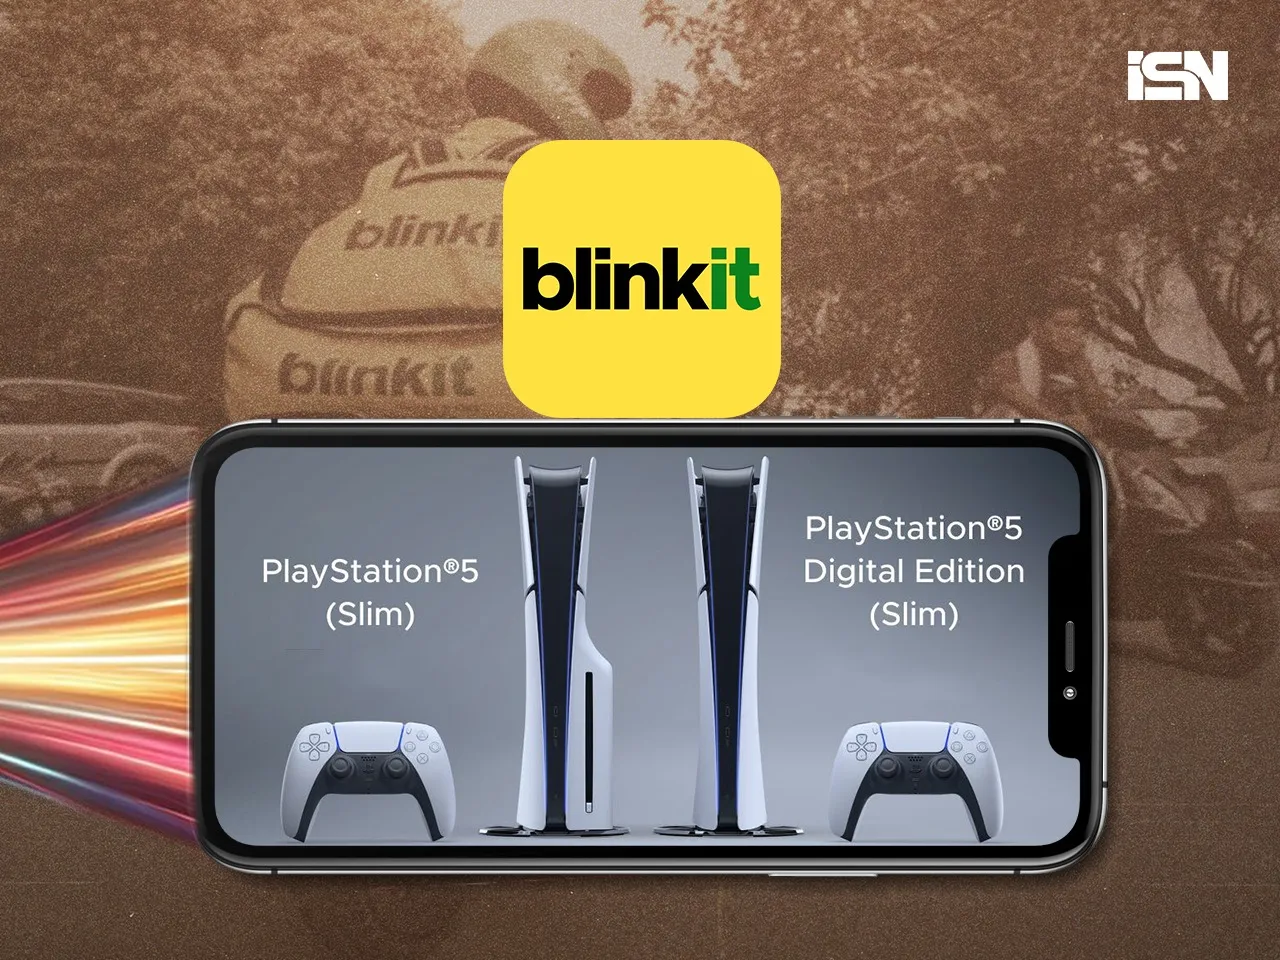 Zomato-owned Blinkit to deliver new PS5 Slim in 10 minutes, partners with Sony